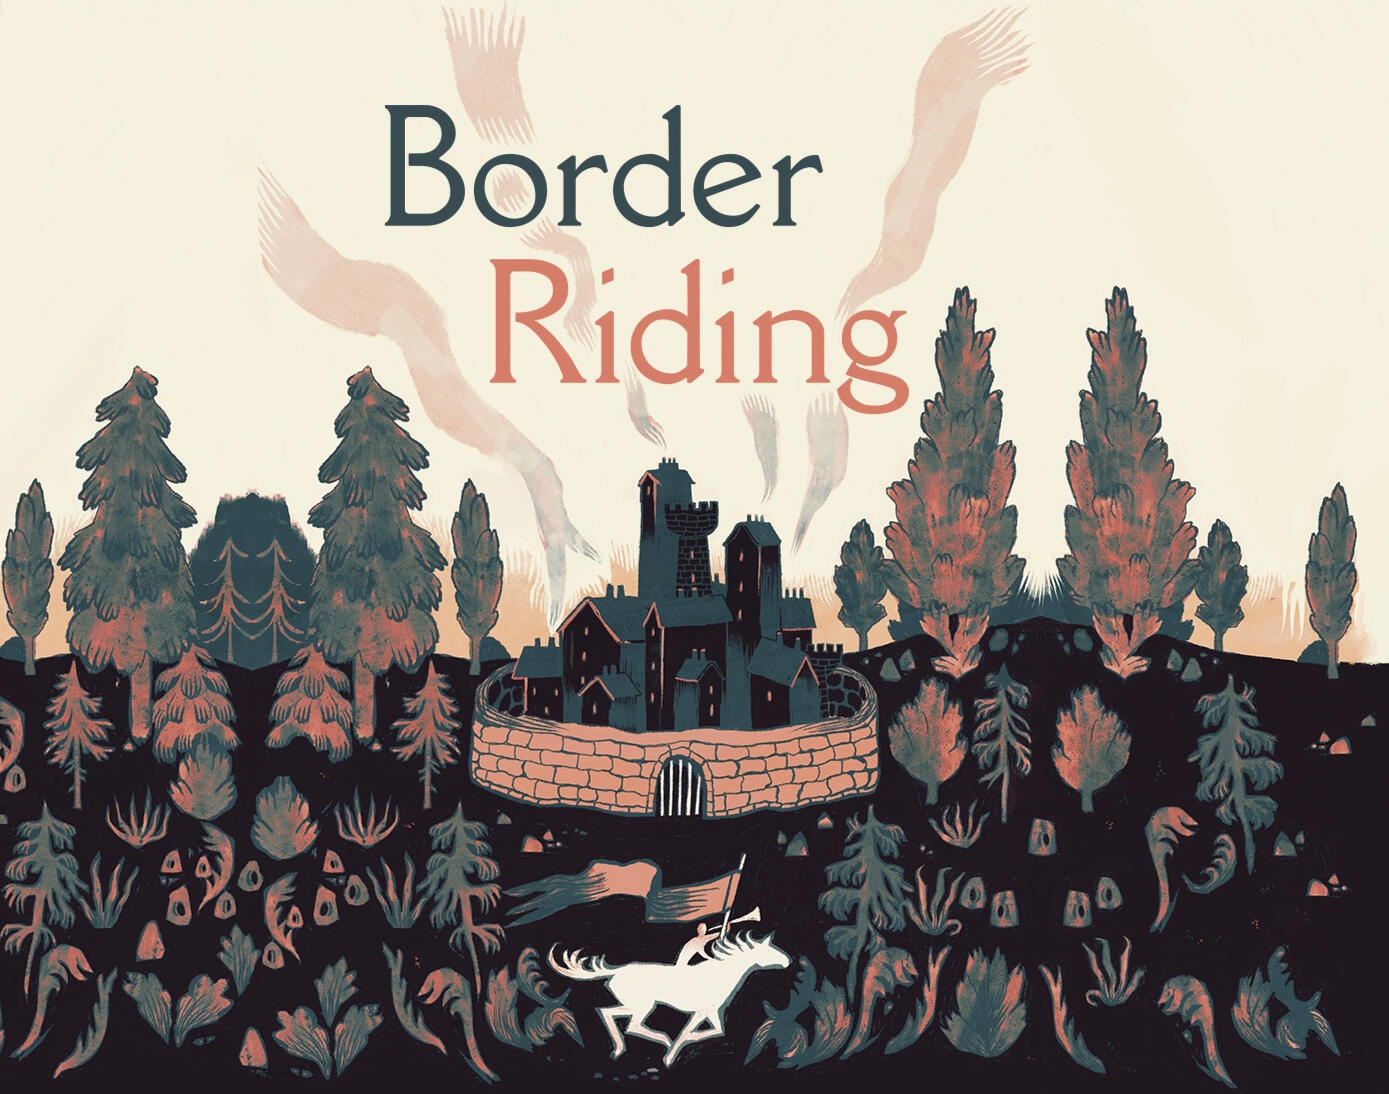 Title: Border Riding. Illustration of a walled village with stylised tall buildings and towers, chimney smoke rising into a bight sky. Directly below the village gallops a rider, holding a banner and blowing a trumpet.